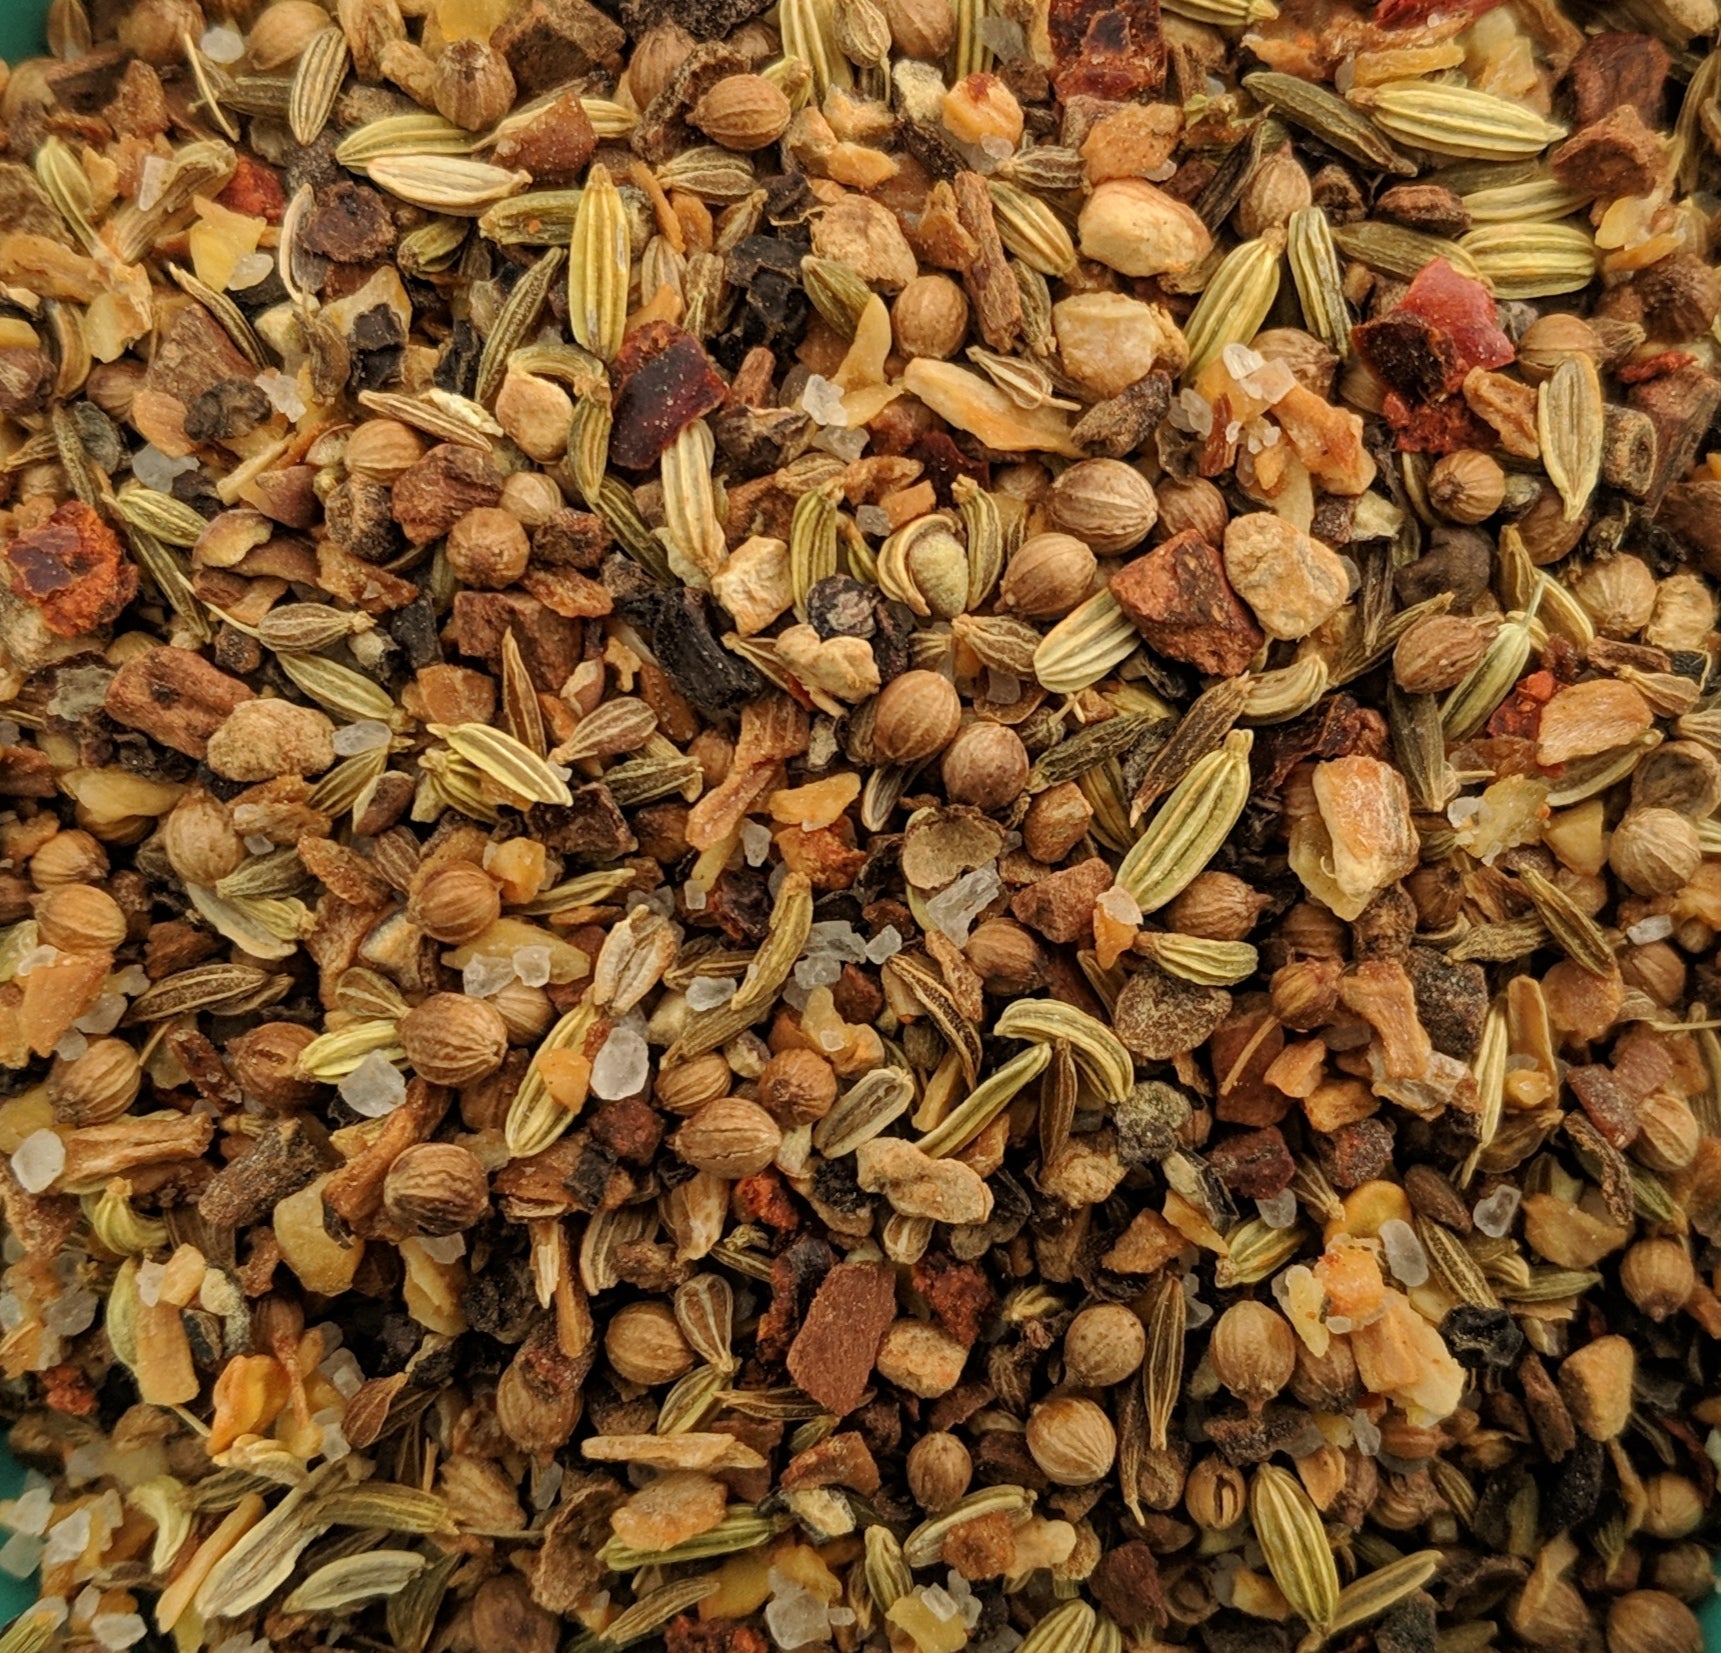 "African BBQ" Spice Mix